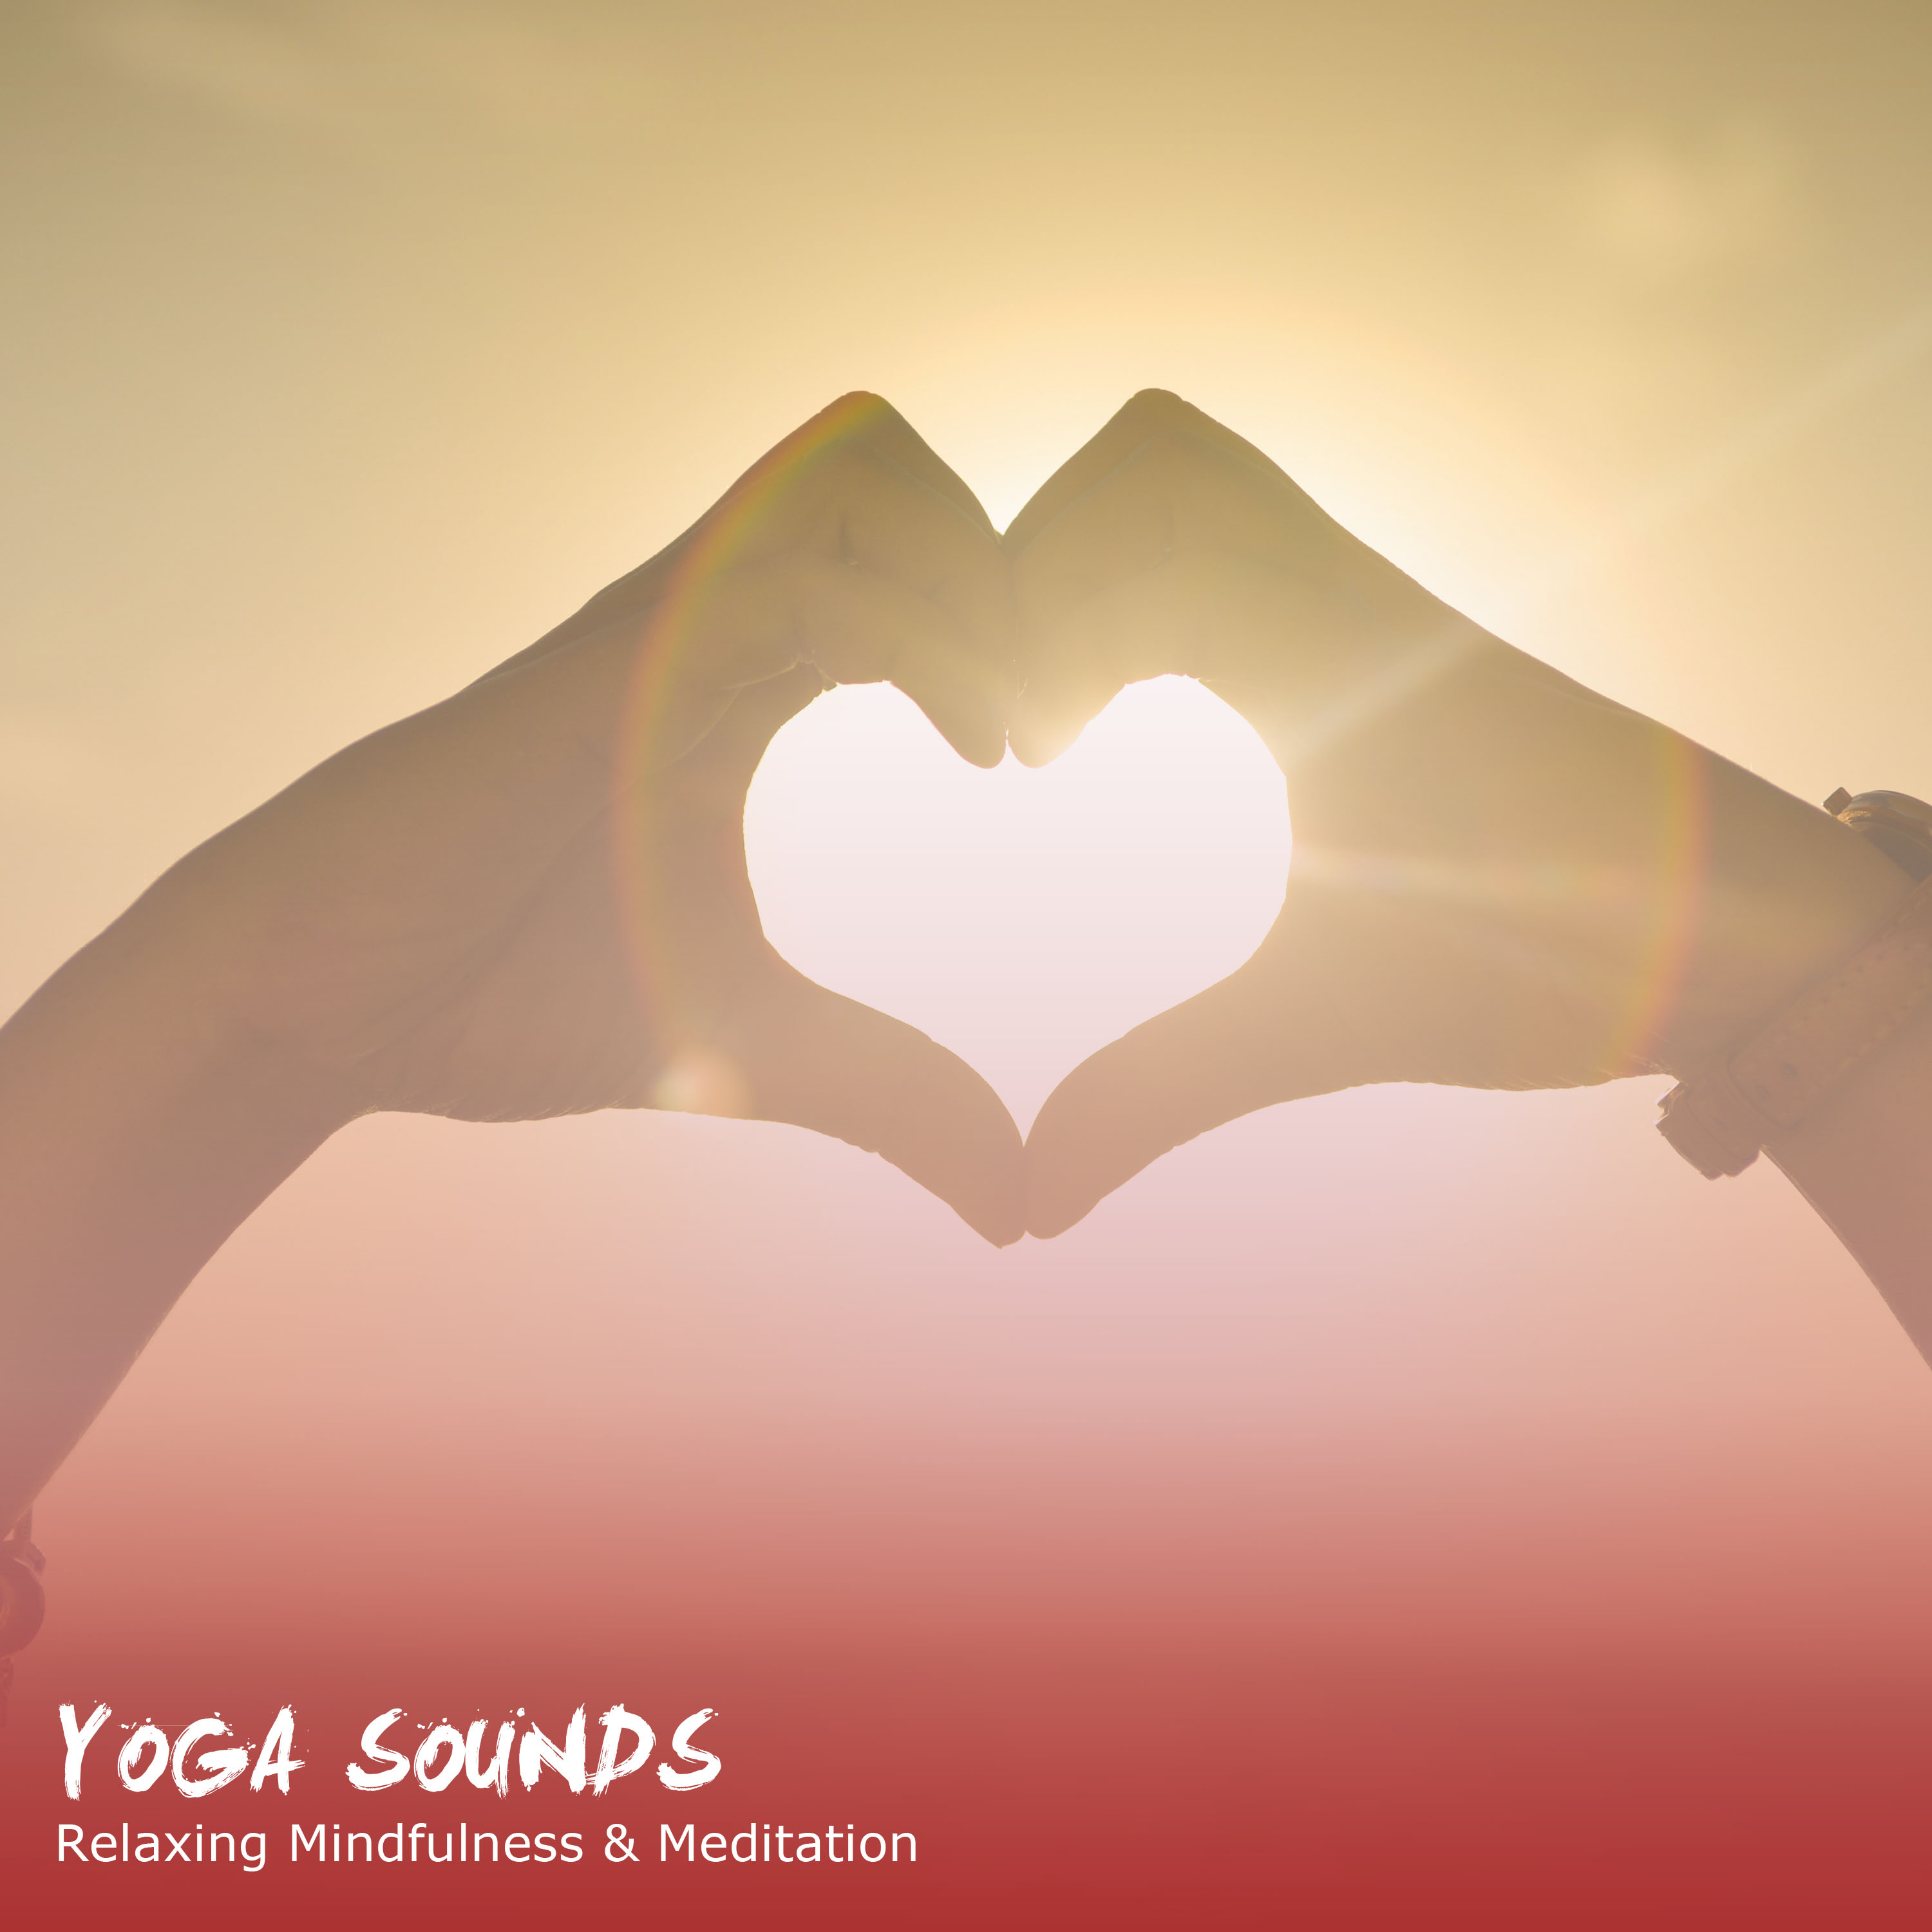 18 Relaxing Mindfulness, Meditation and Yoga Sounds